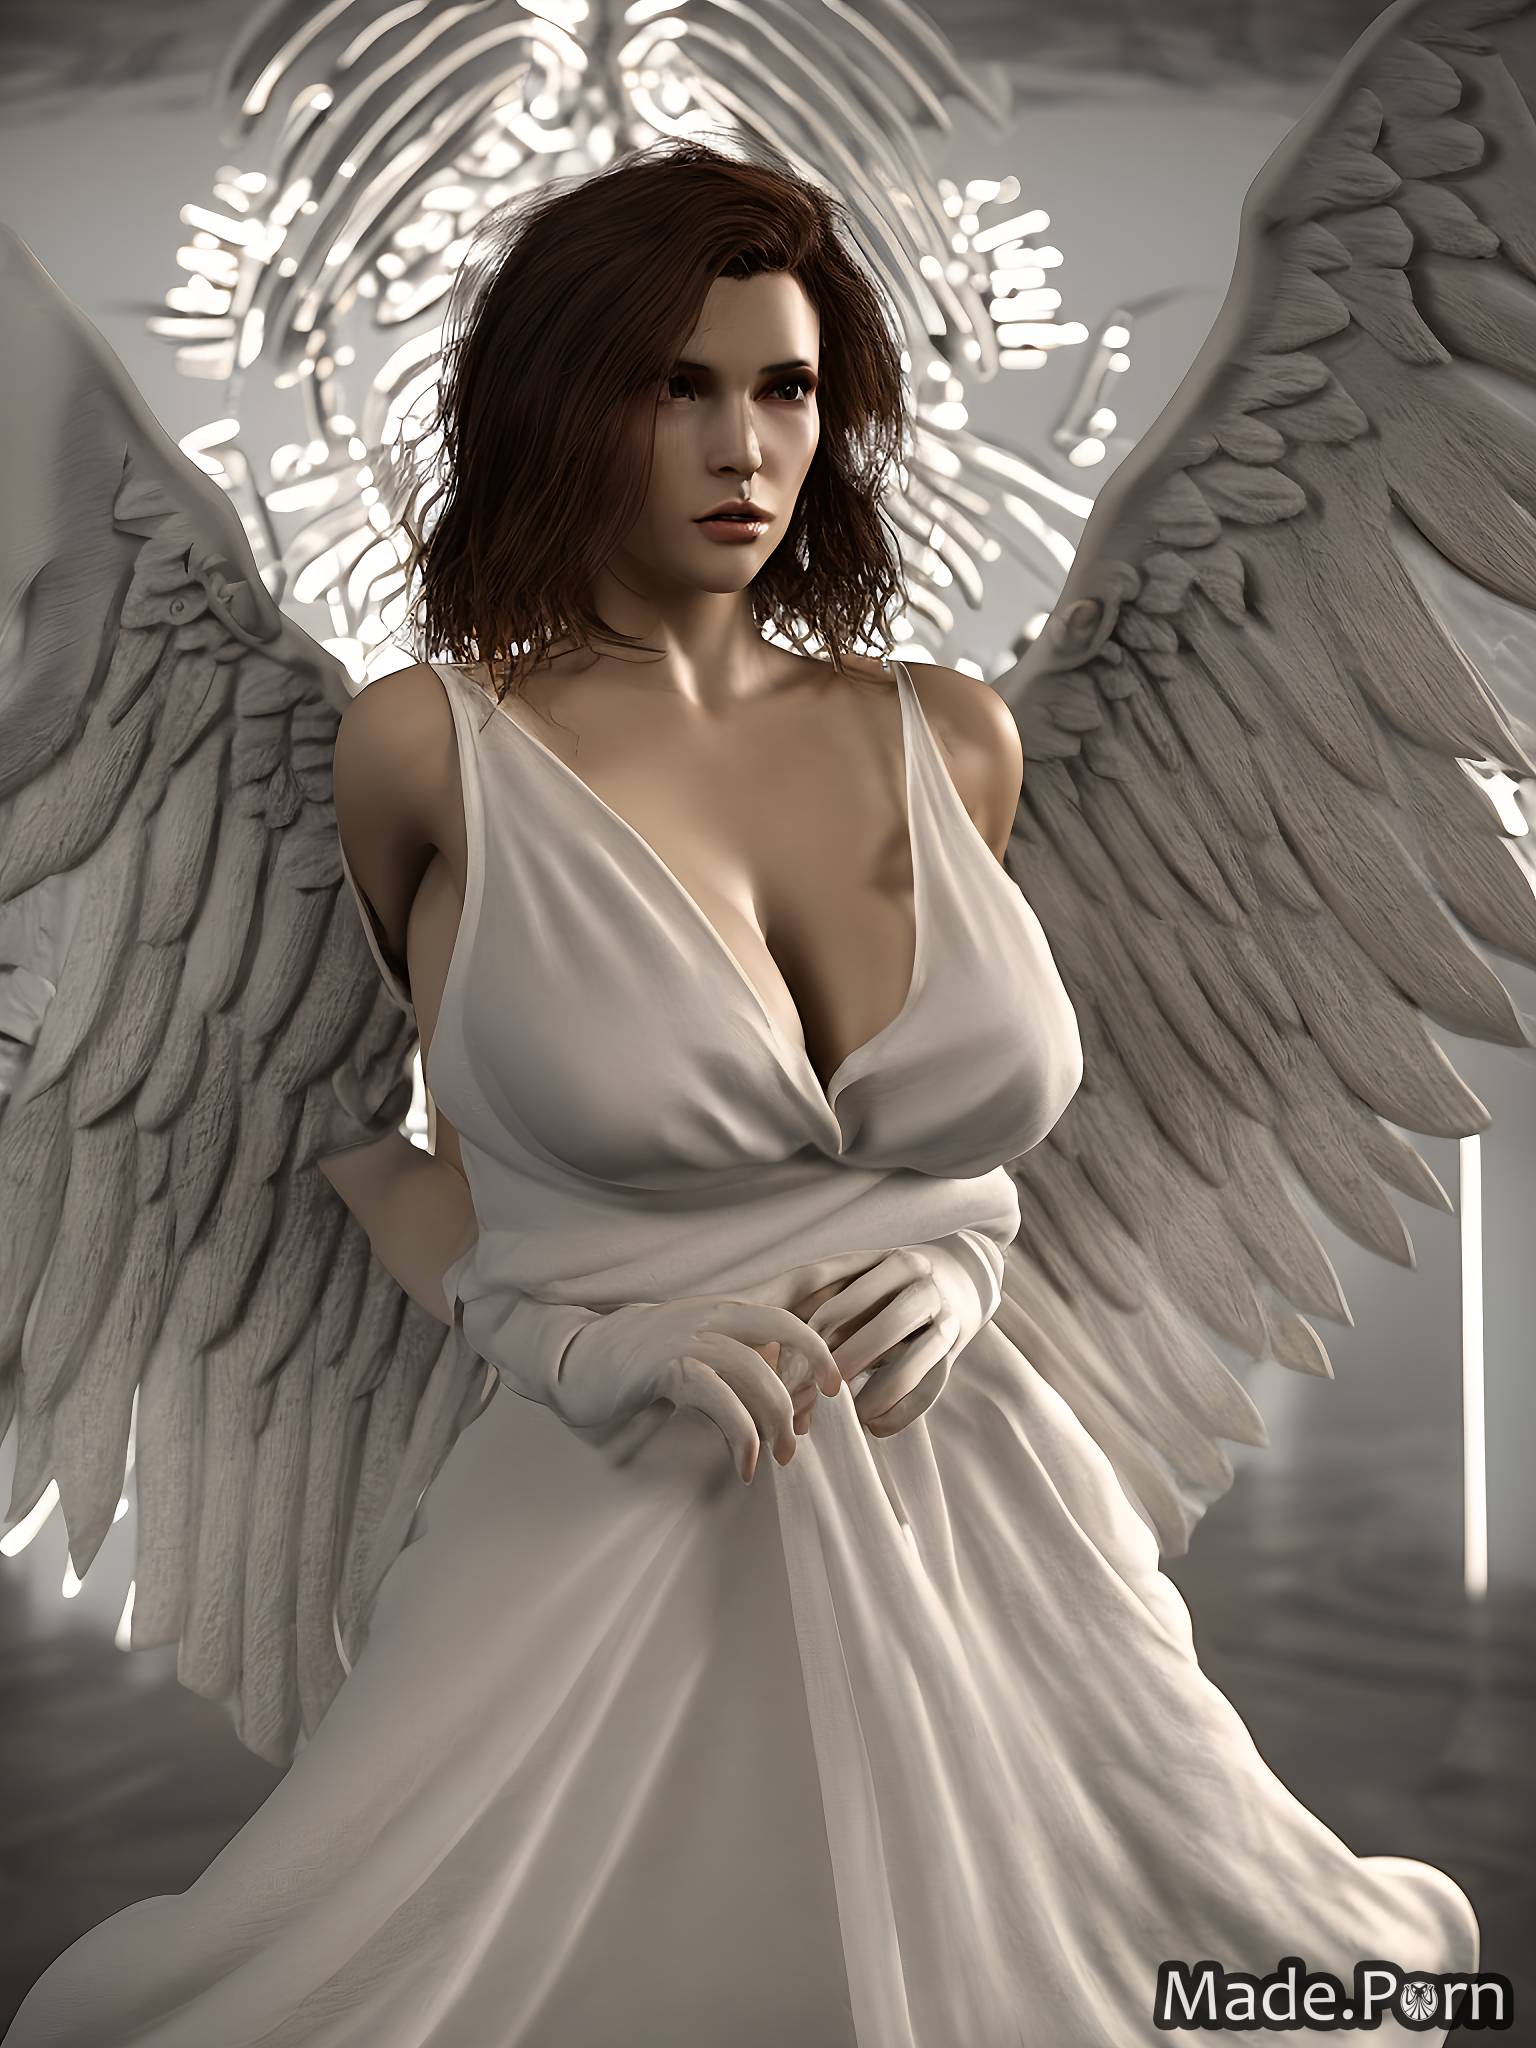 3d Angel Porn - Porn image of 30 angel french brunette 3D created by AI